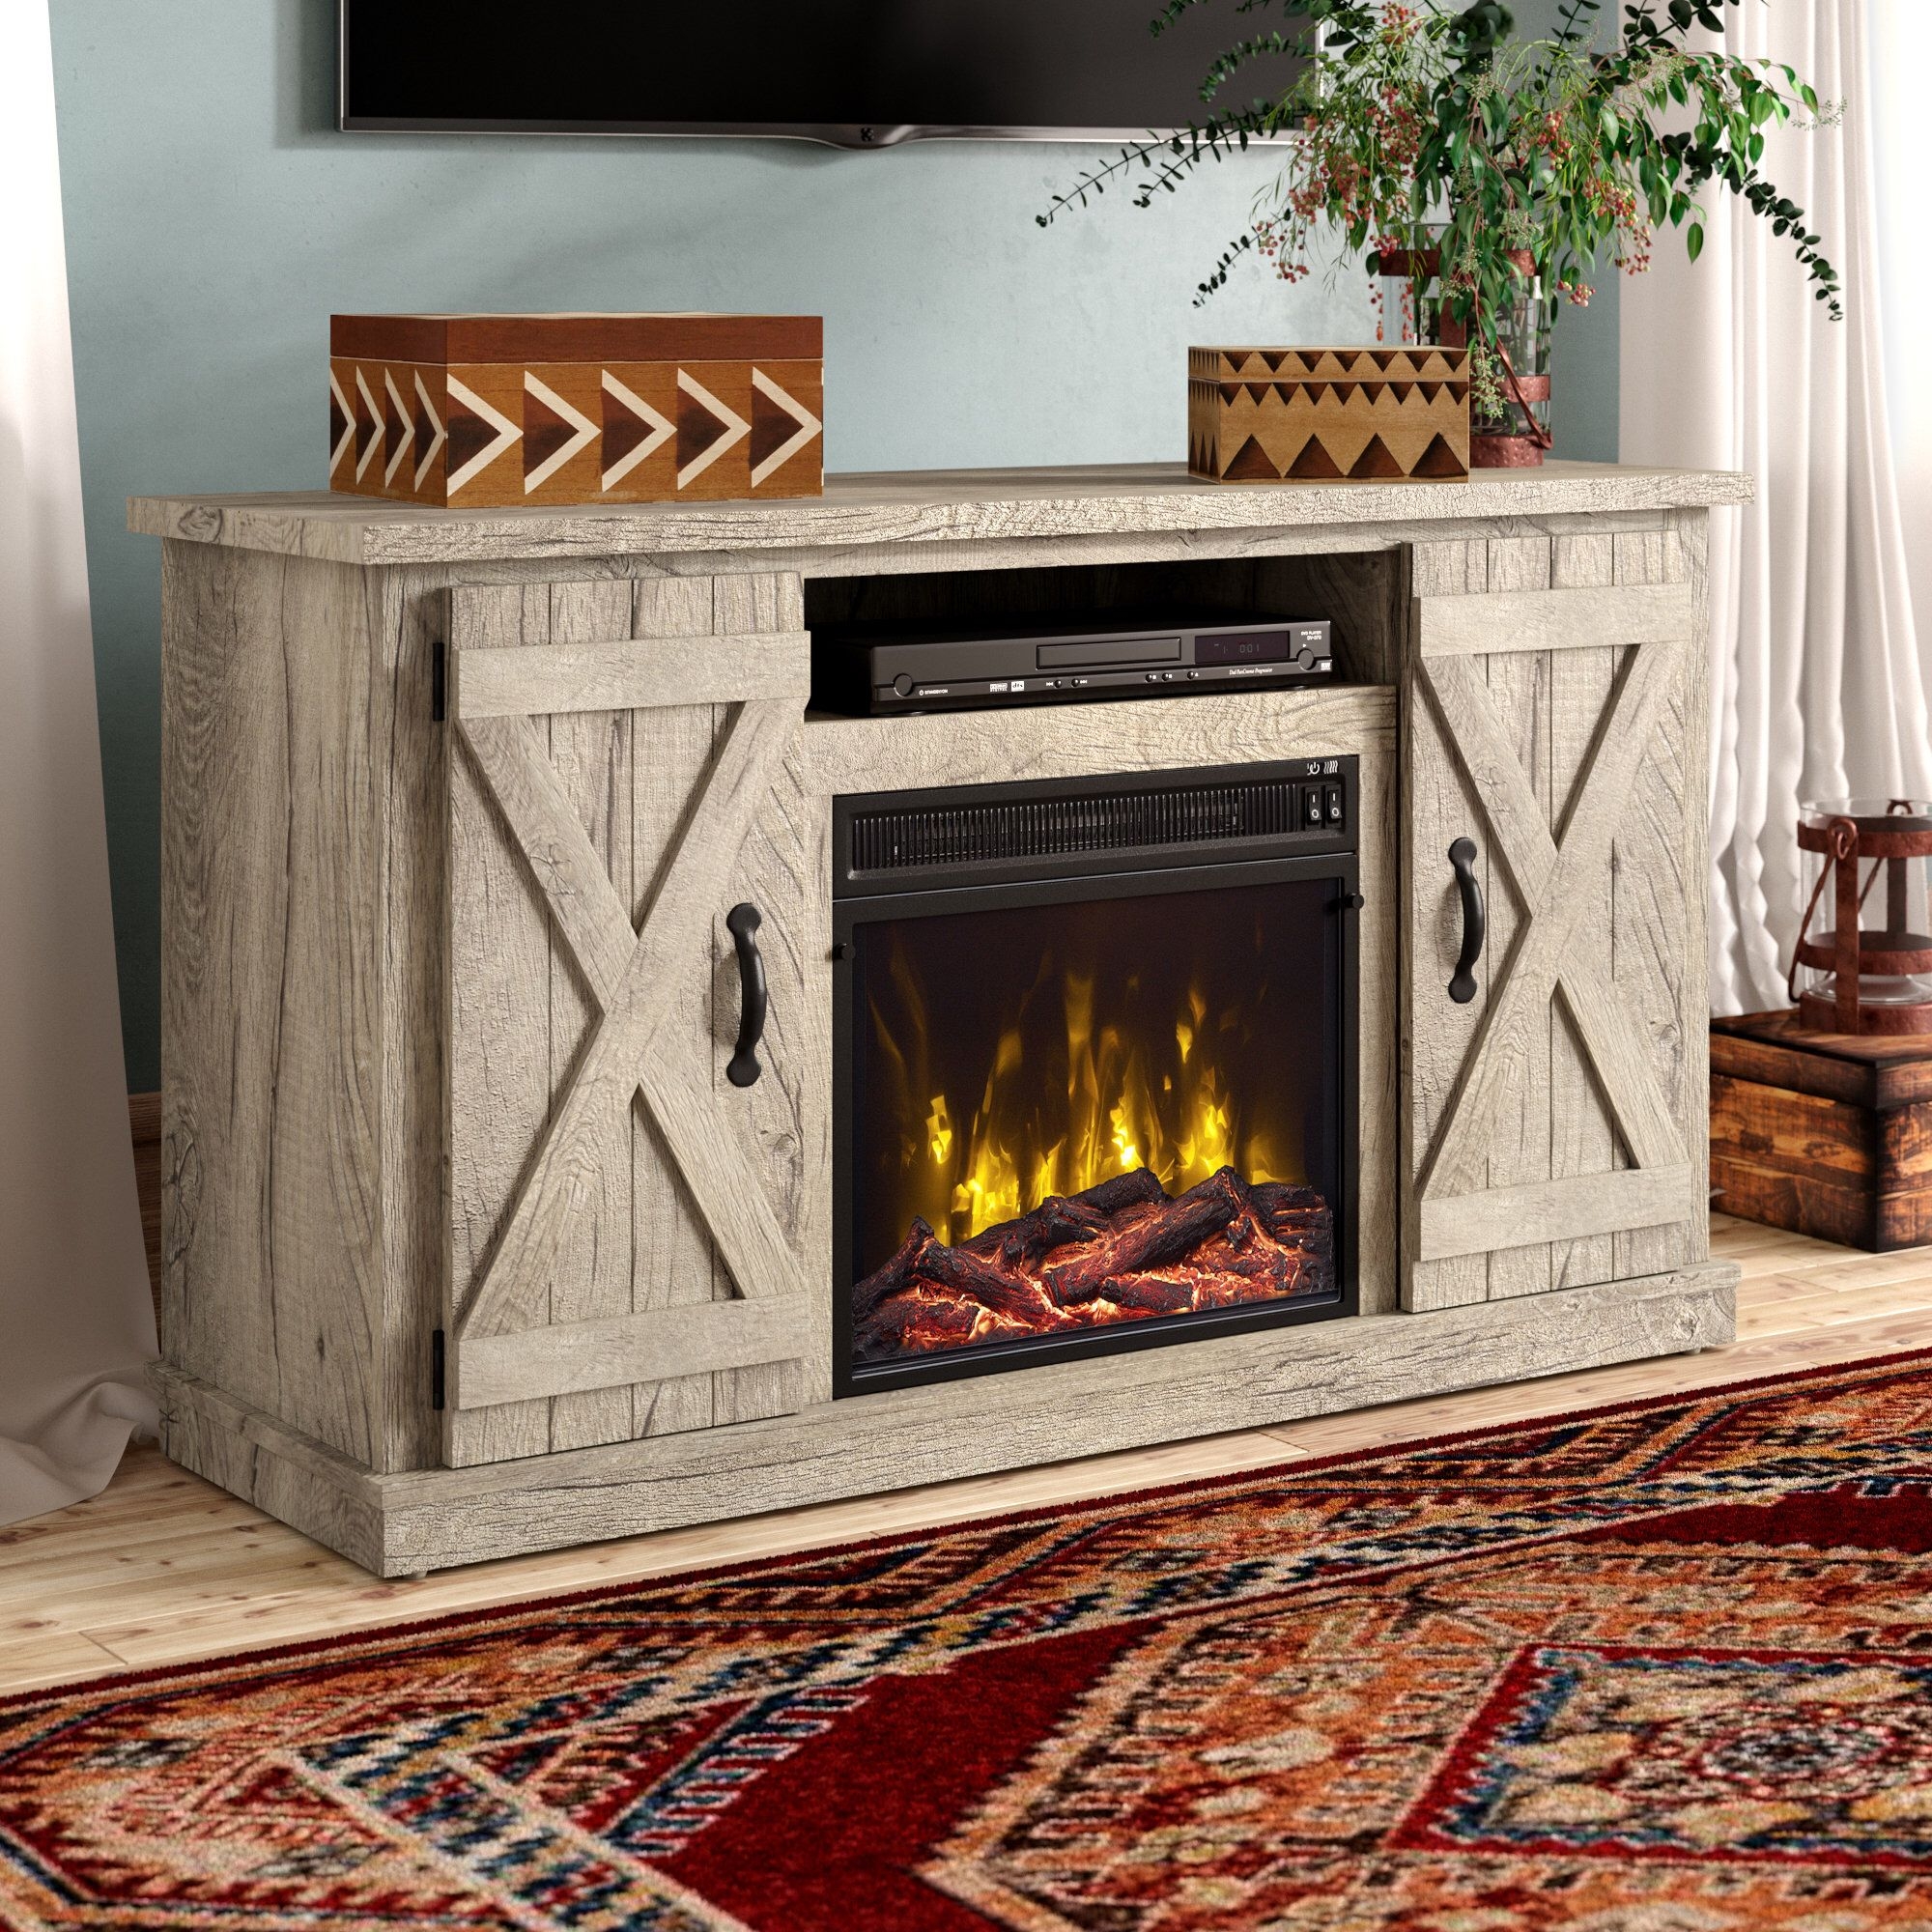 Tv Cabinet With Doors Visualhunt, Schuyler Tv Stand For Tvs Up To 60 With Electric Fireplace